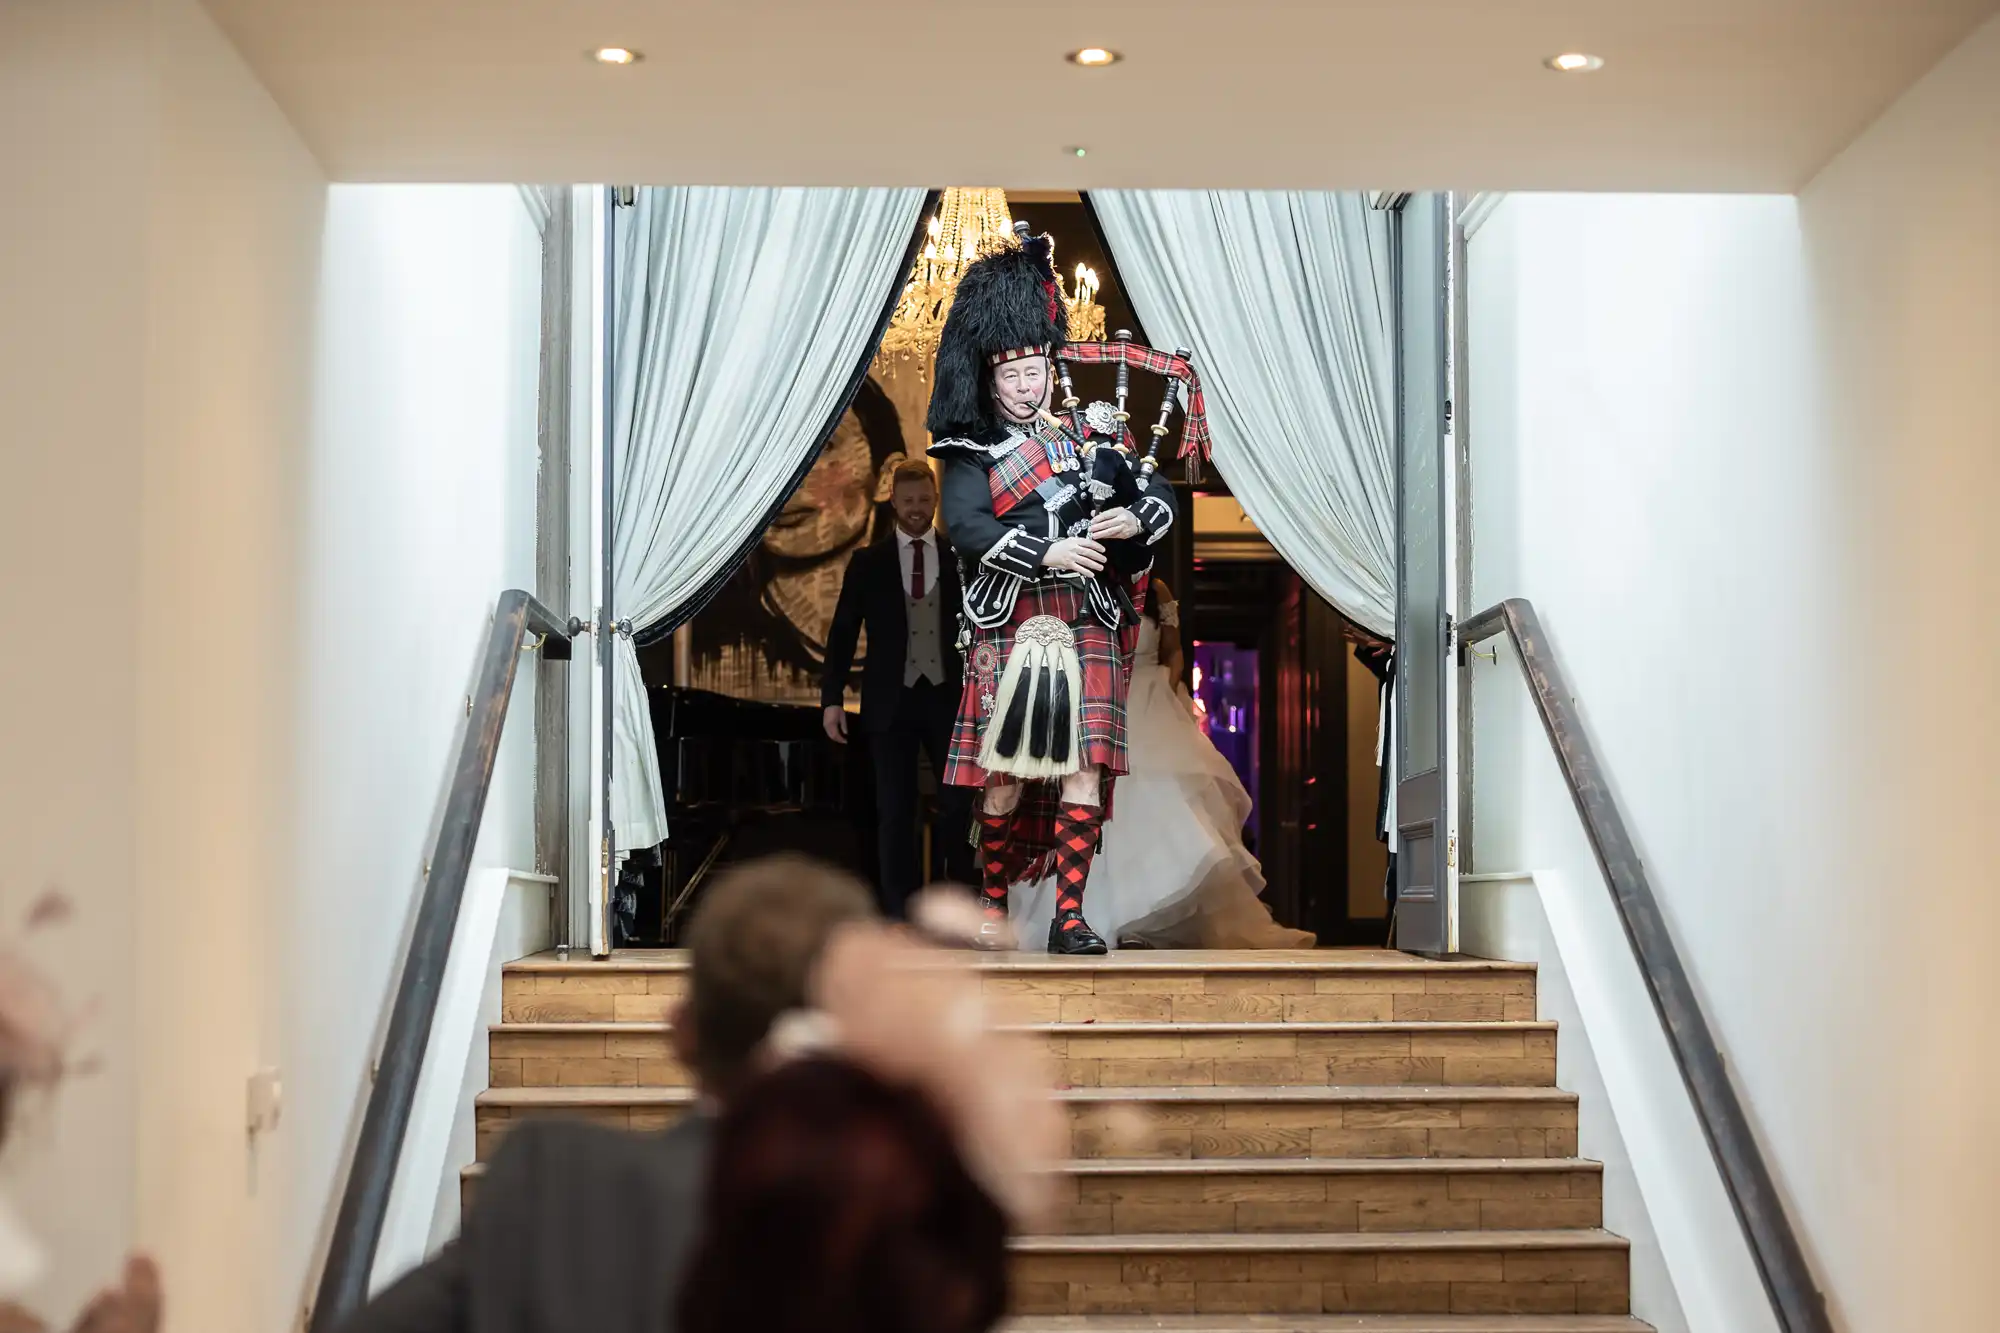 A bagpiper in traditional Scottish attire plays the bagpipes while descending a staircase, followed by two other people in formal wear.